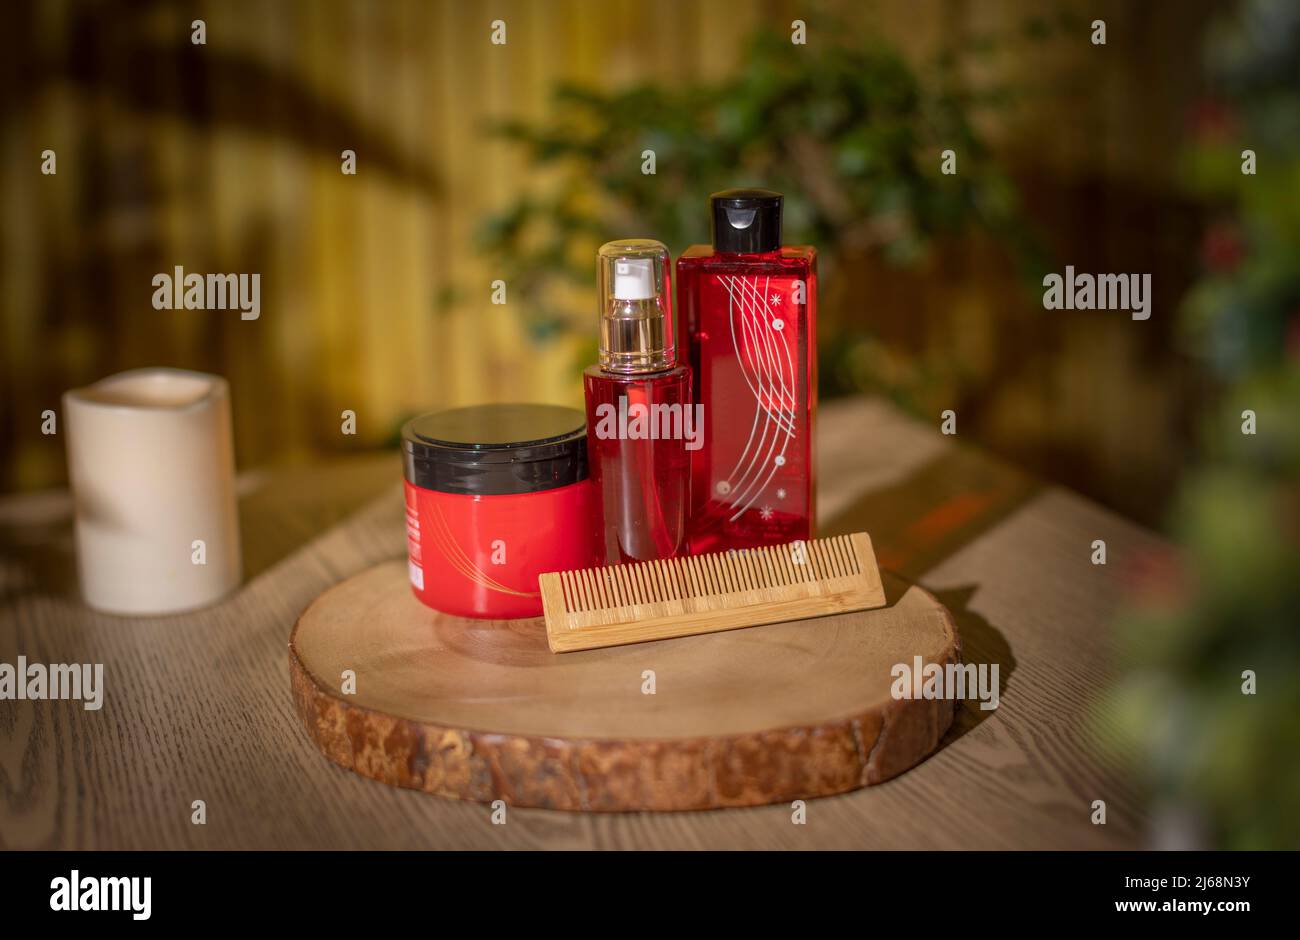 Hair products Stock Photo